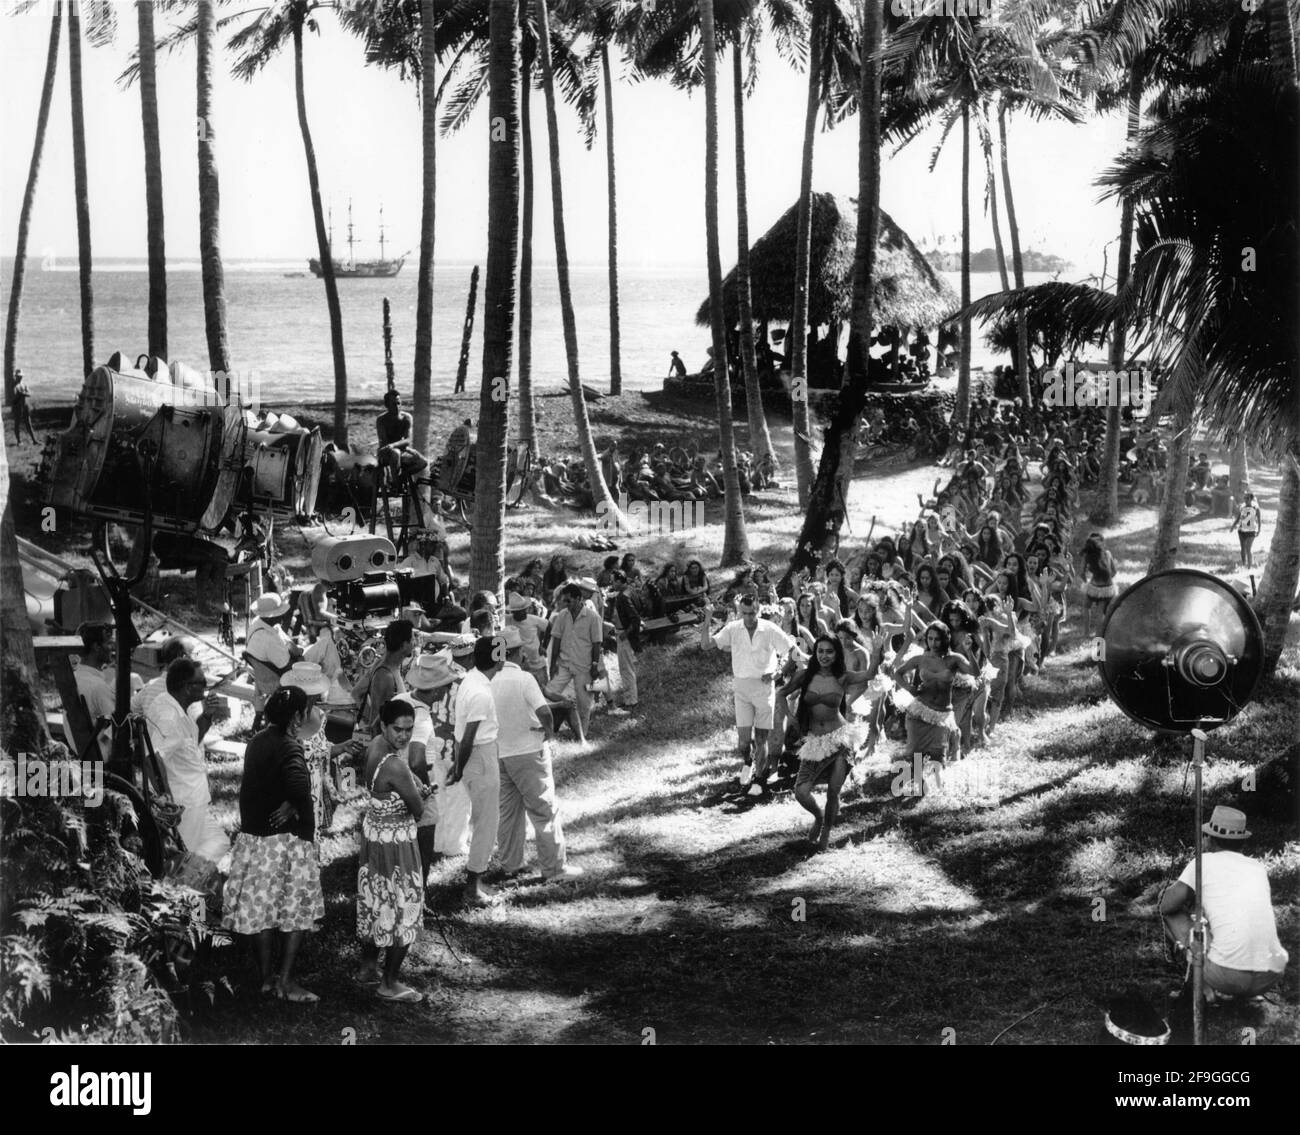 Film Crew filming / rehearsing Native dance sequence on set candid during location shooting of MUTINY ON THE BOUNTY 1962 directors LEWIS MILESTONE and CAROL REED (uncredited) novel James Nordhoff and James Norman Hall screenplay Charles Lederer Arcola Pictures / Metro Goldwyn Mayer Stock Photo